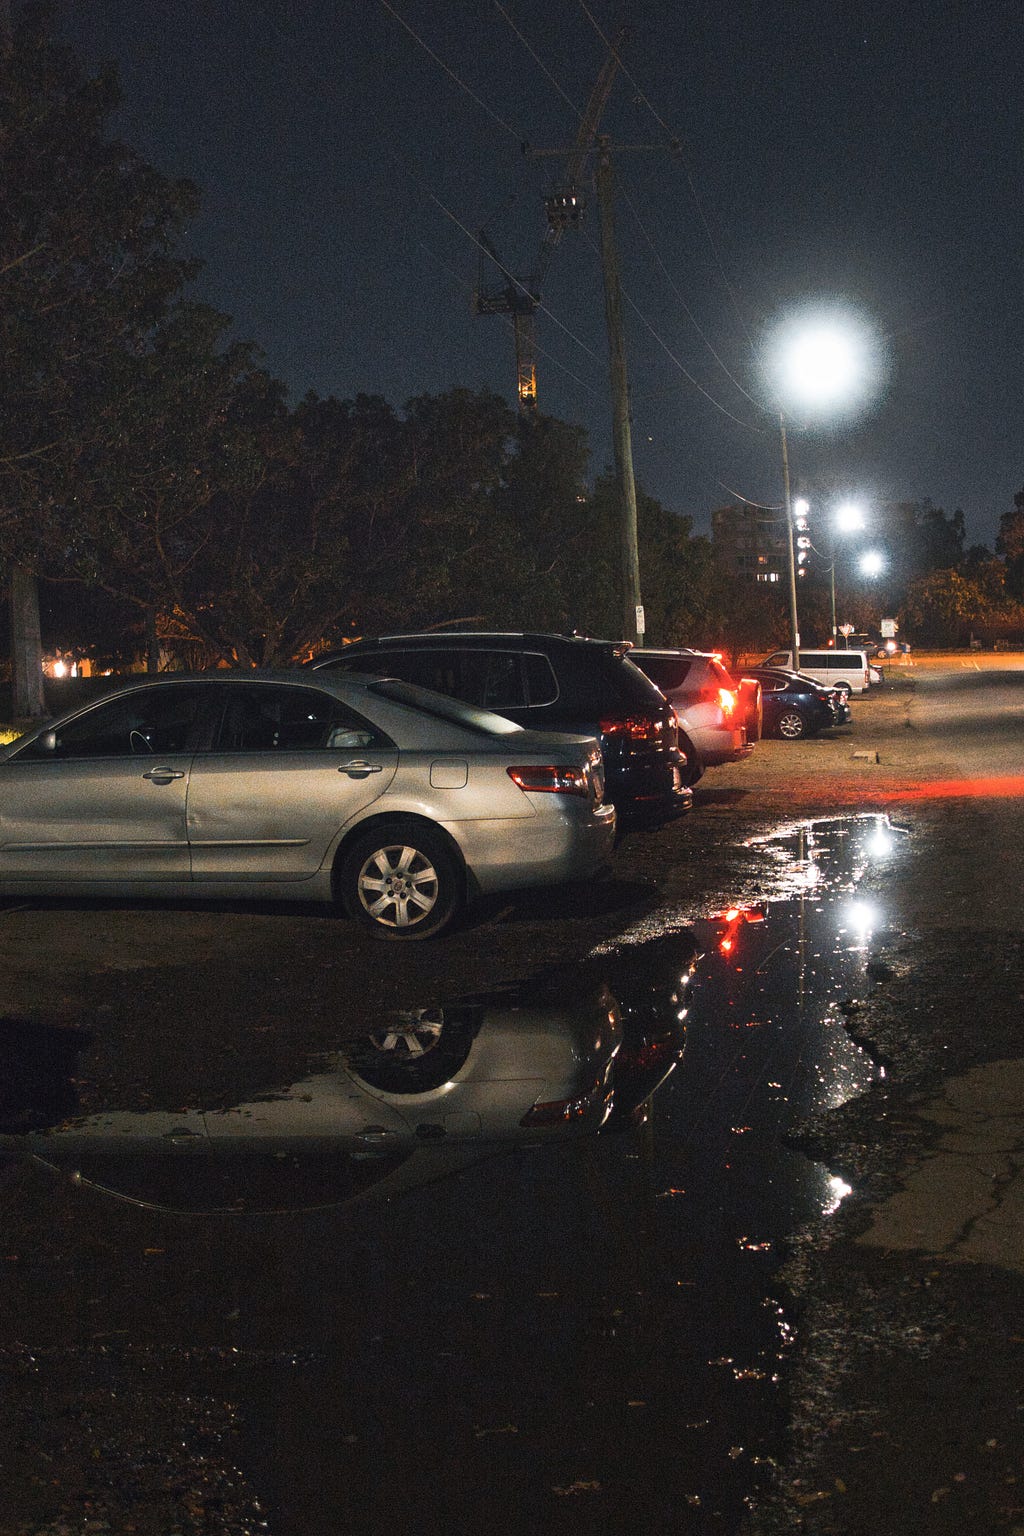 An outdoor dirt parking lot with cars pointing to the left. The puddle in front of the camera reflects the light above and along the street.